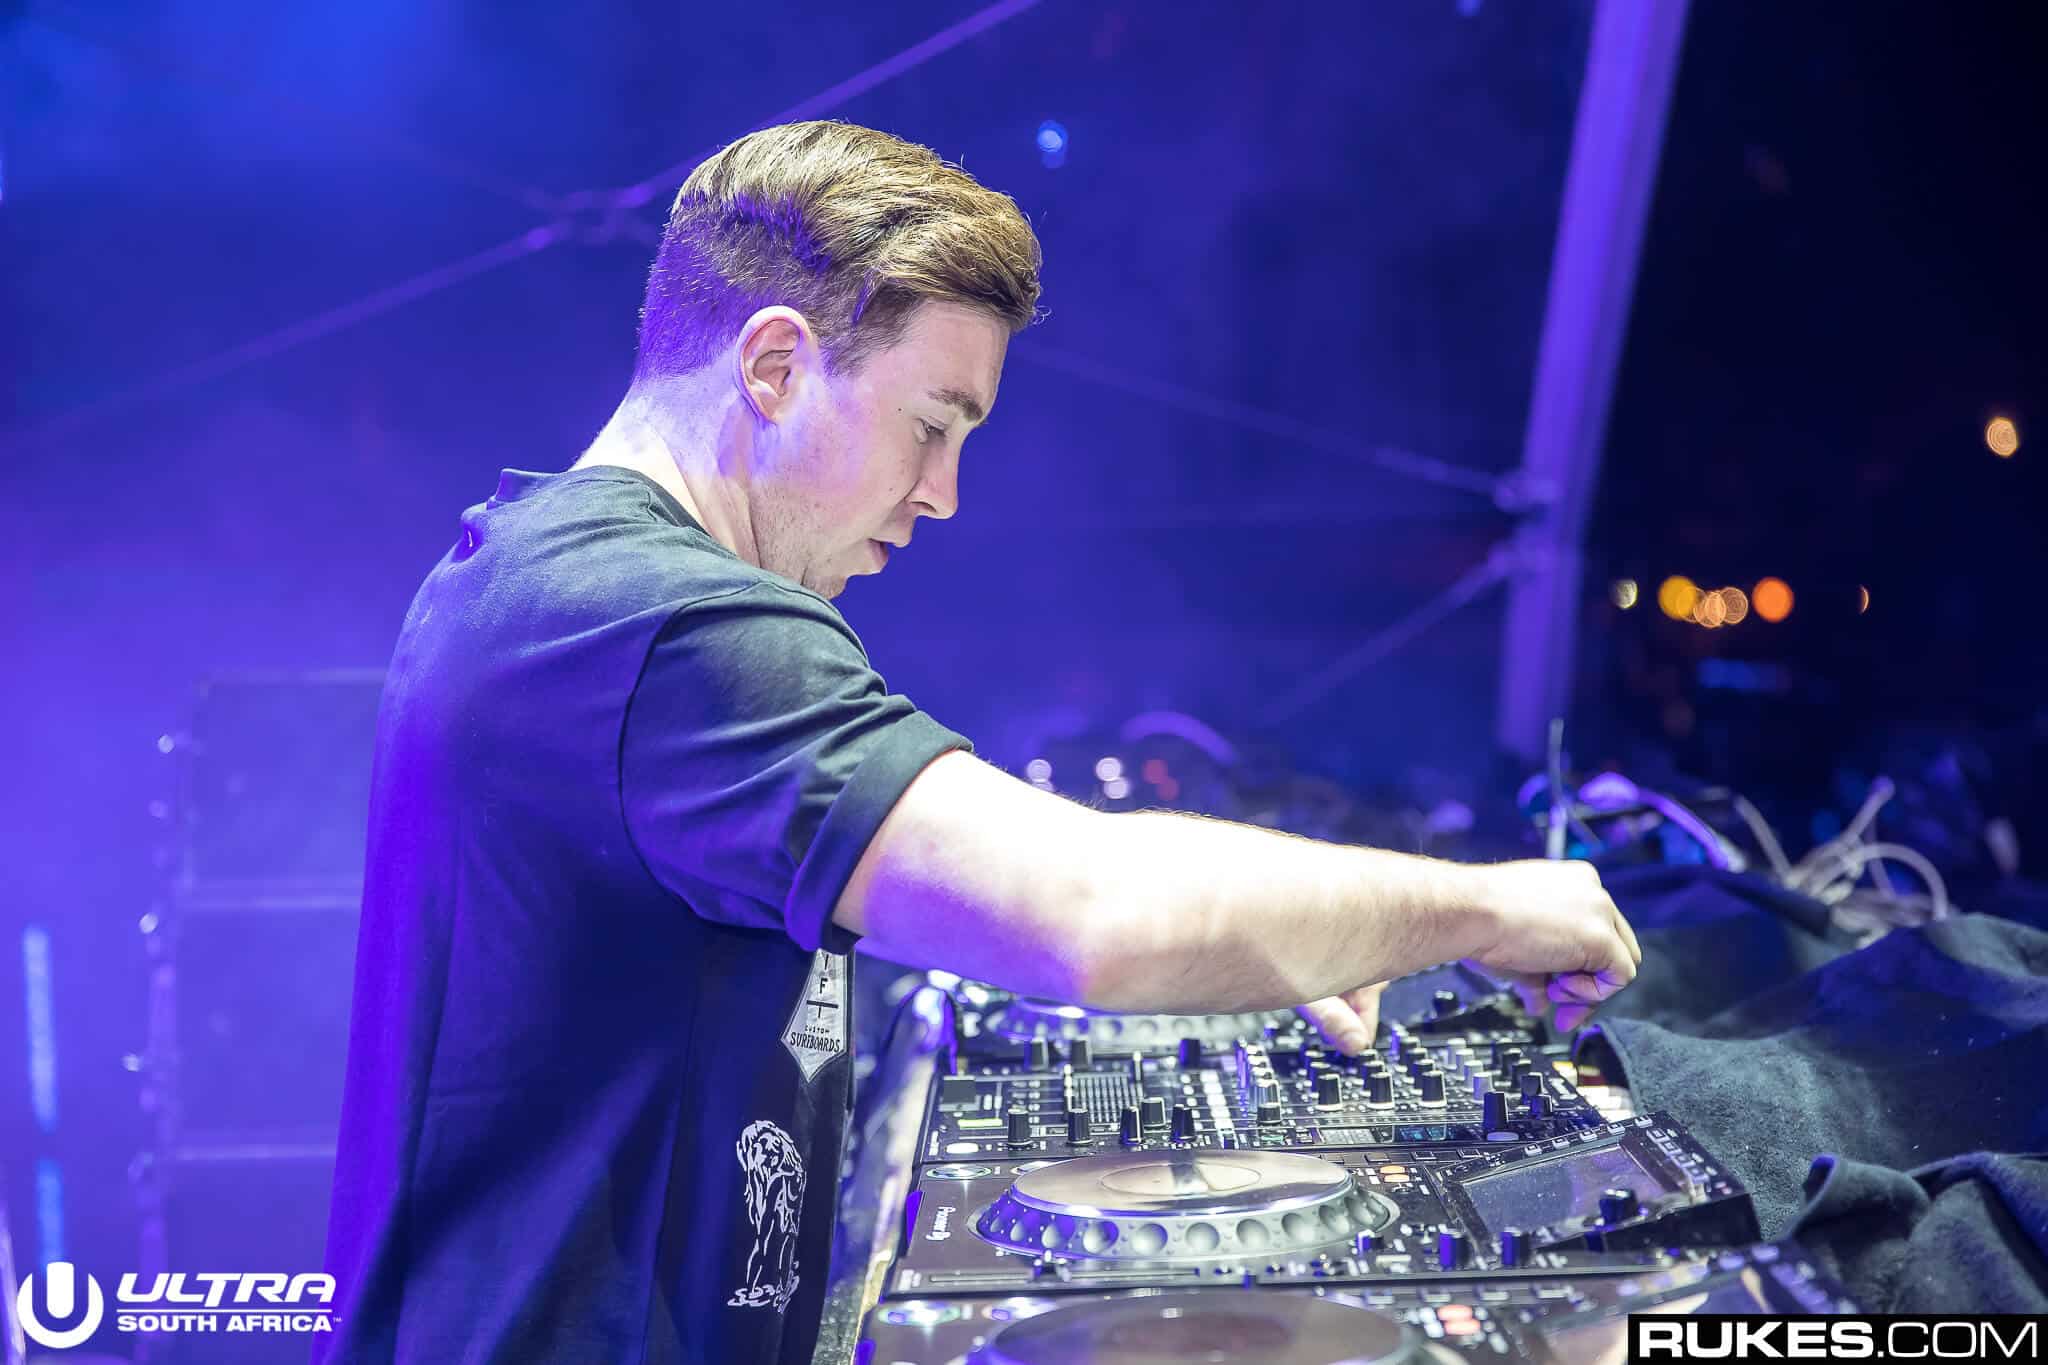 Hardwell has first interview since 2018 in episode 2 of Revealed podcast